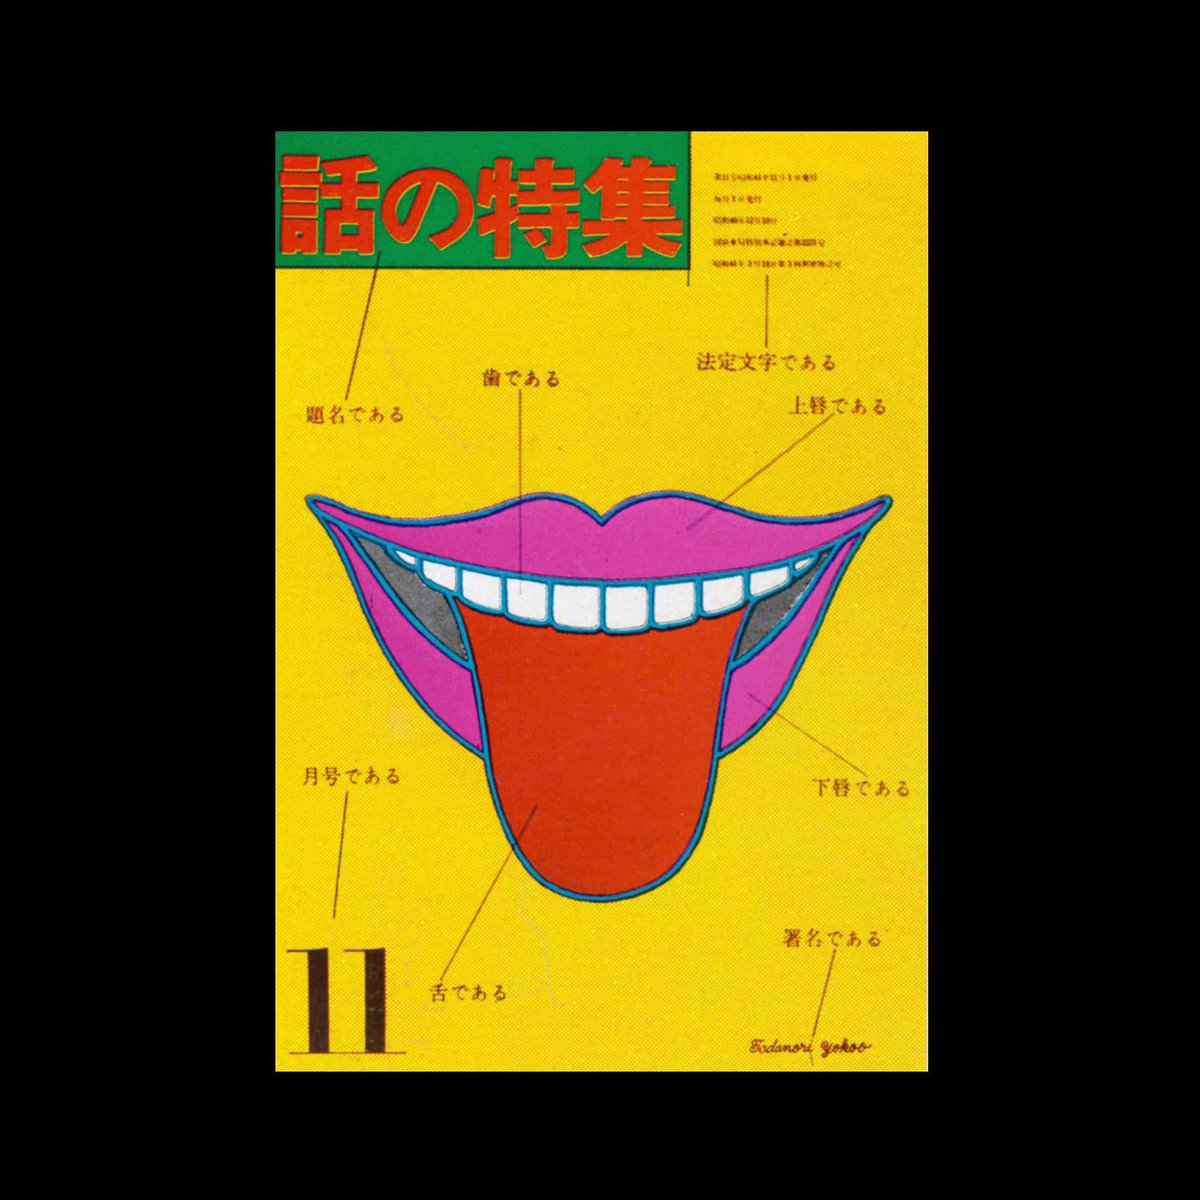 Design work by Tadanori Yokoo featured in Gebrauchsgraphik, 5, 1968 ‘Playful imagination and frequent irony, naiveté, and audacity are his most popular expressions. Everything reveals the joy and ease of Yokoo's work. And yet he devotes utmost attention to every single detail and…